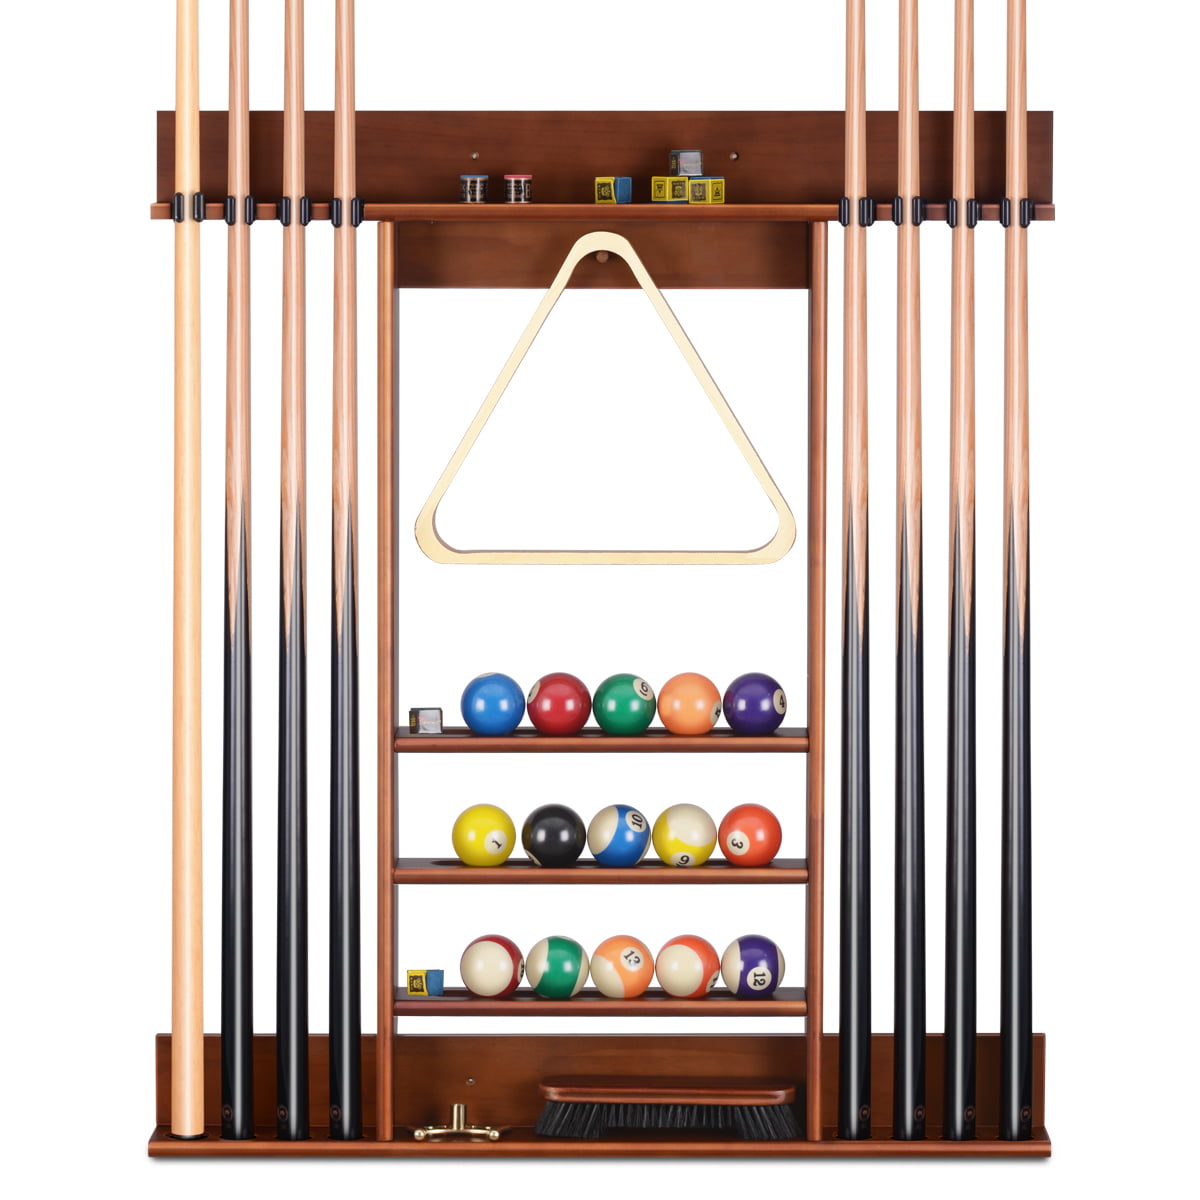 12 X Pool Cue Stick Wall Mounted Rack Wooden Billiard Cue Stick Holder Set 